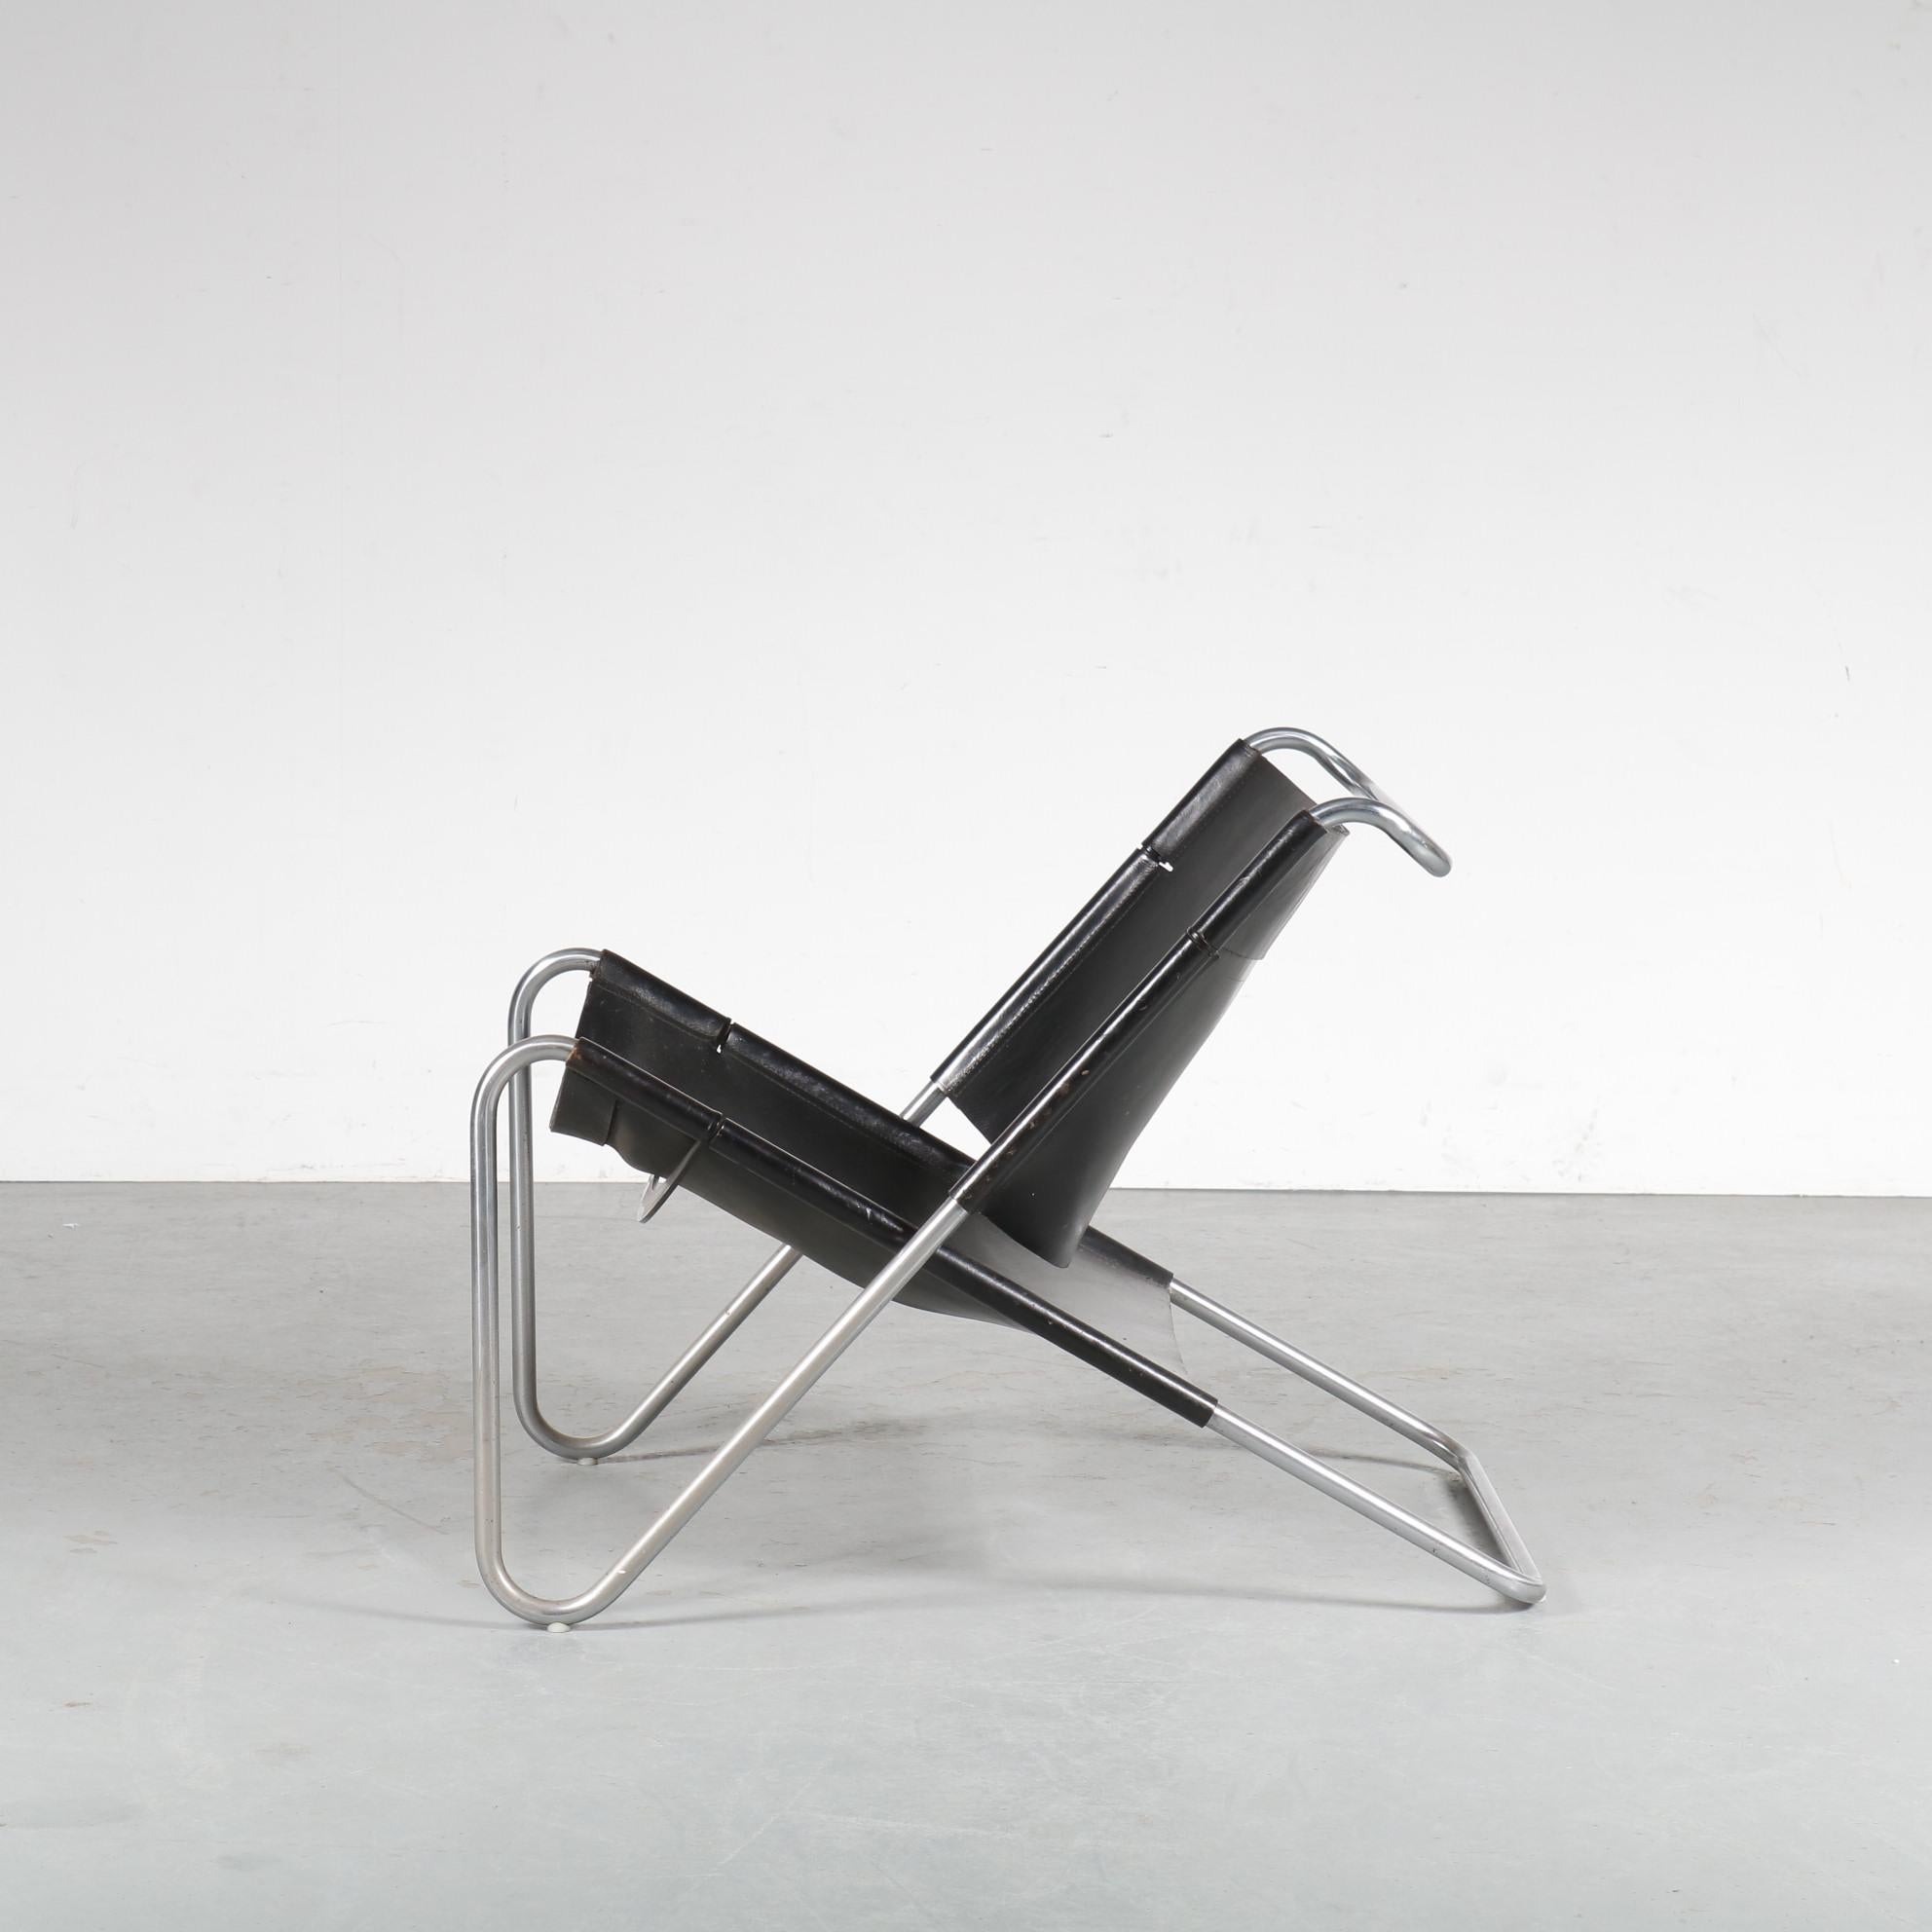 Late 20th Century Kwok Hoi Chan Lounge Chair for Spectrum, Netherlands 1970